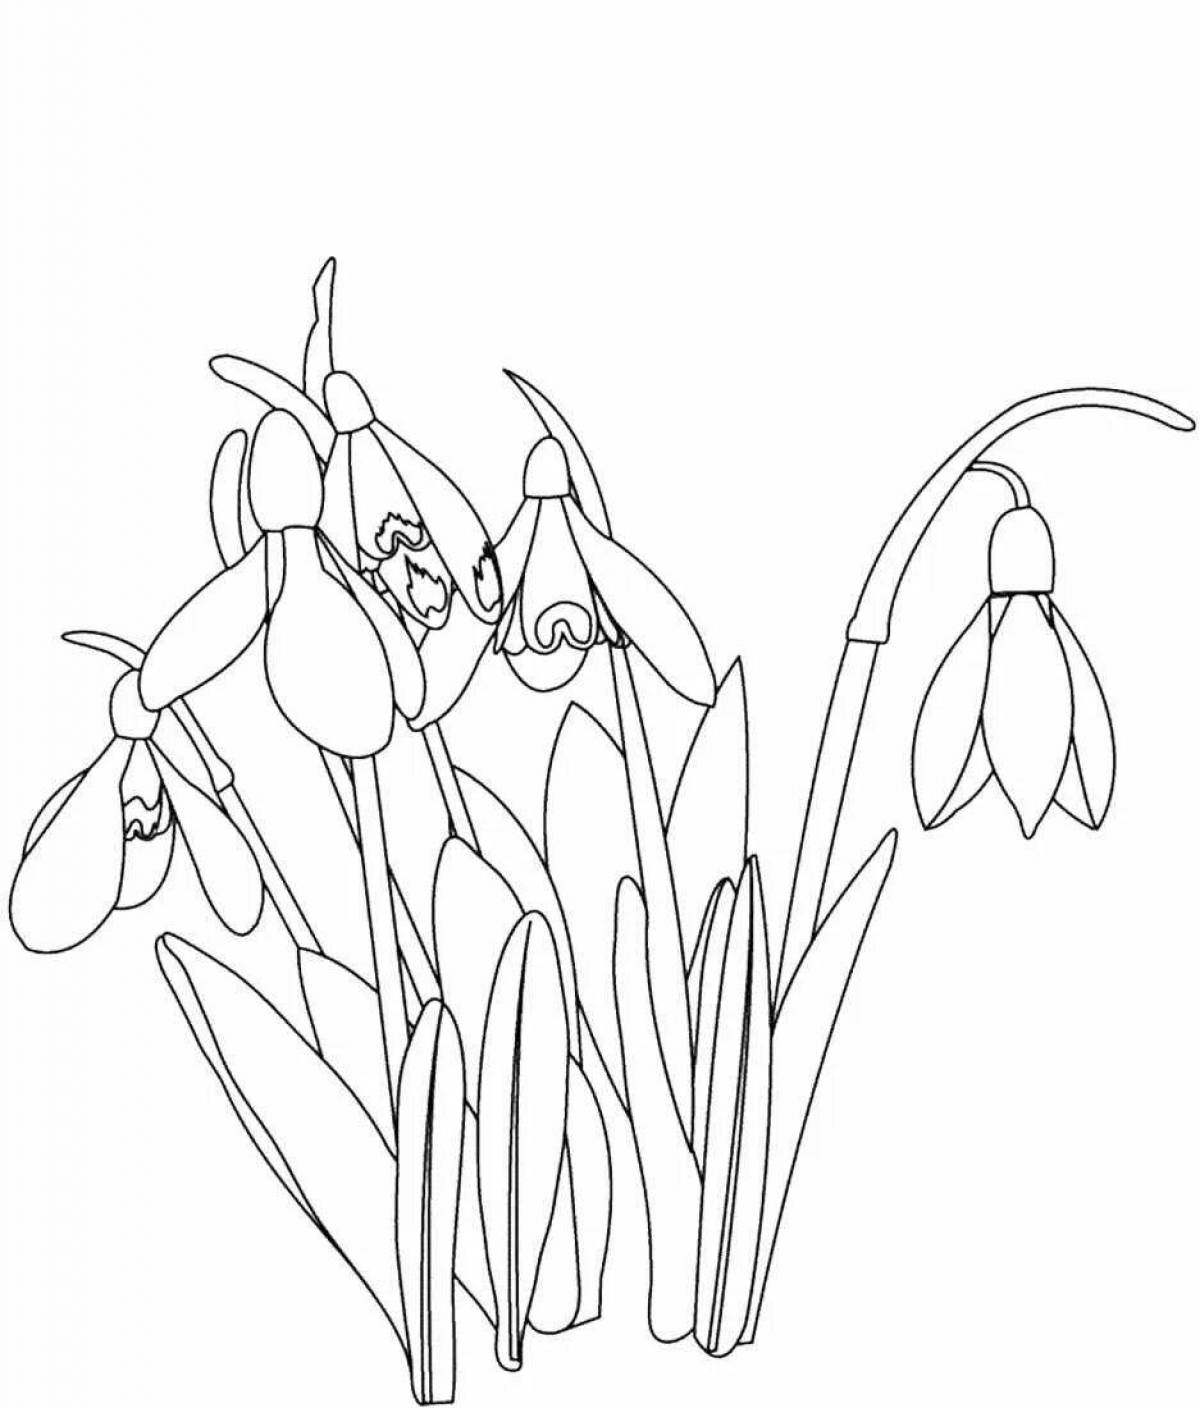 Amazing spring flowers coloring page